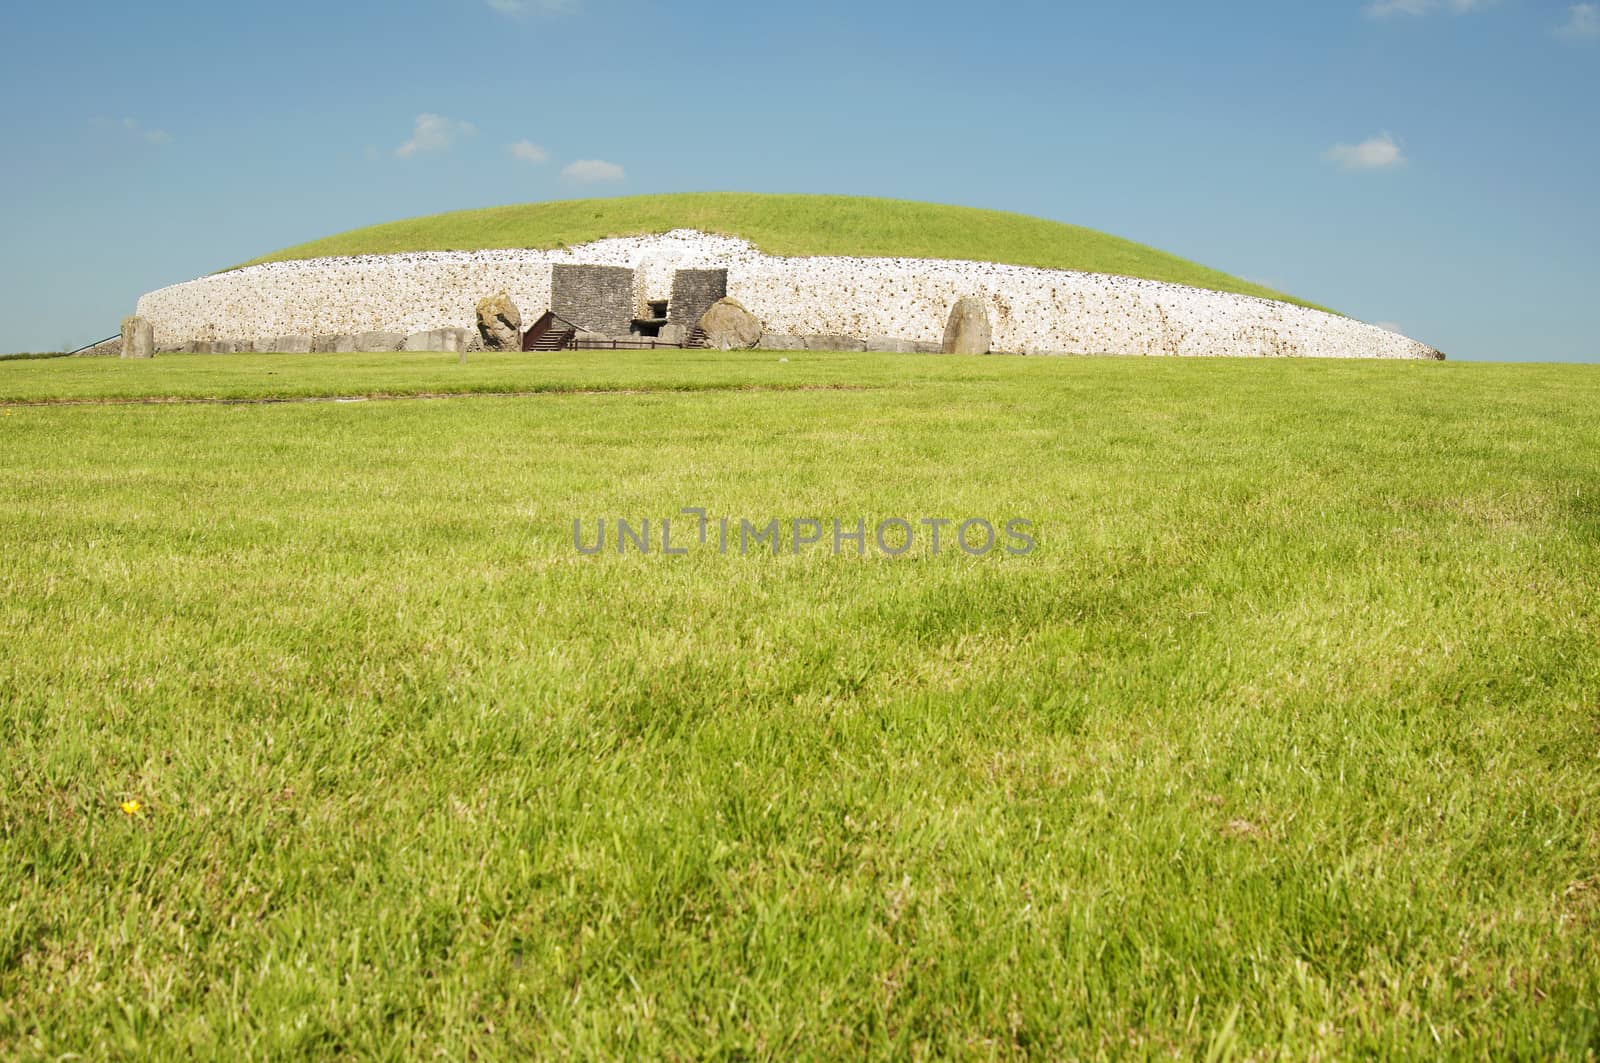 Newgrange is a prehistoric monument in Ireland, It was built about 3200 BC during the Neolithic period, which makes it older than Stonehenge and the Egyptian pyramids.